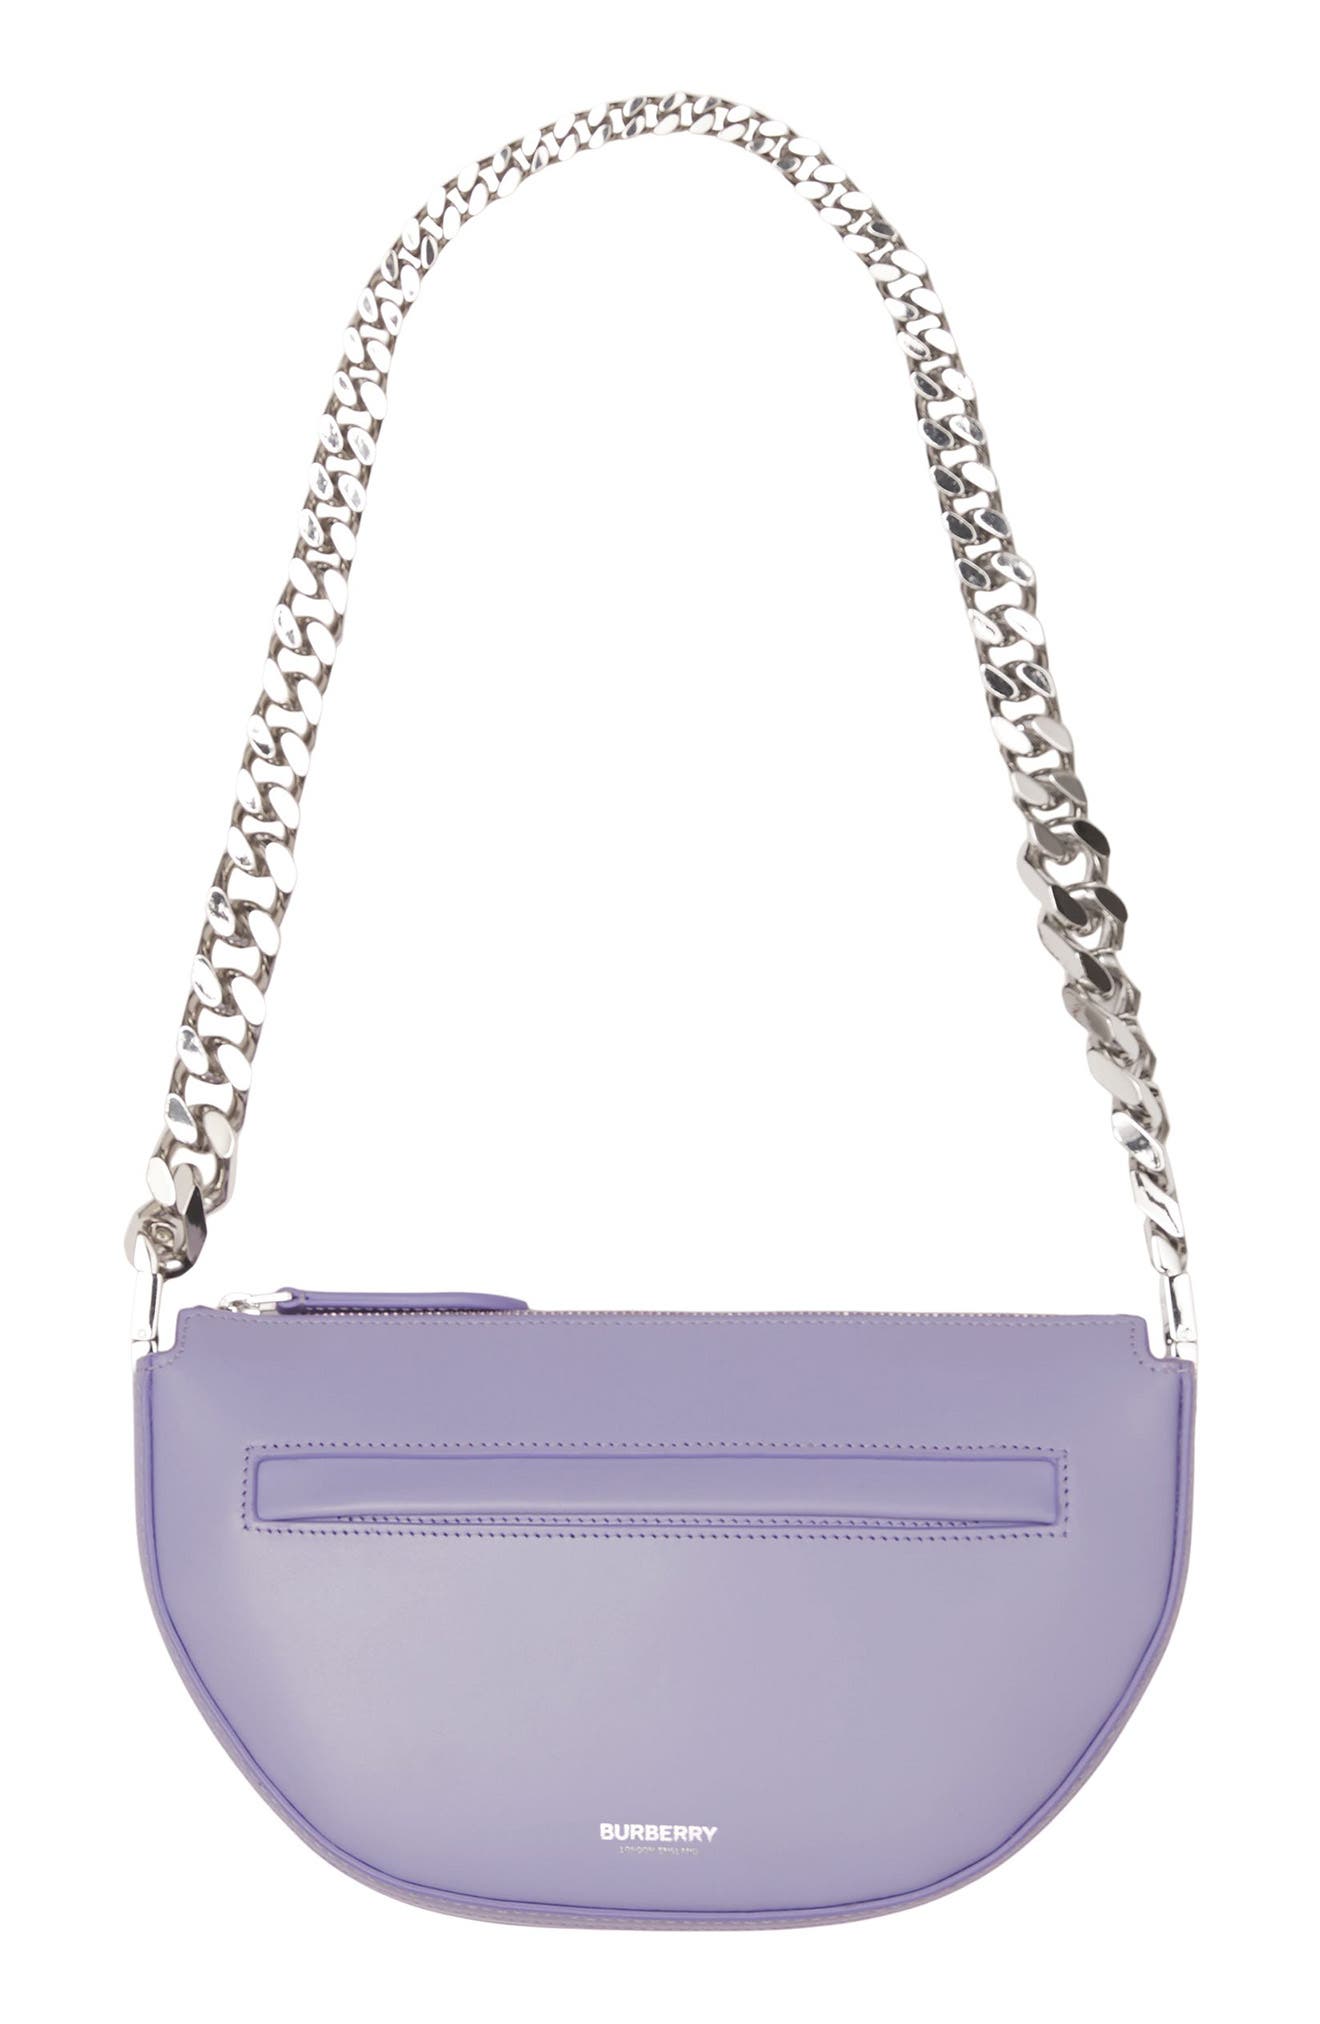 Burberry Mini Olympia Leather Shoulder Bag in Soft Violet at Nordstrom